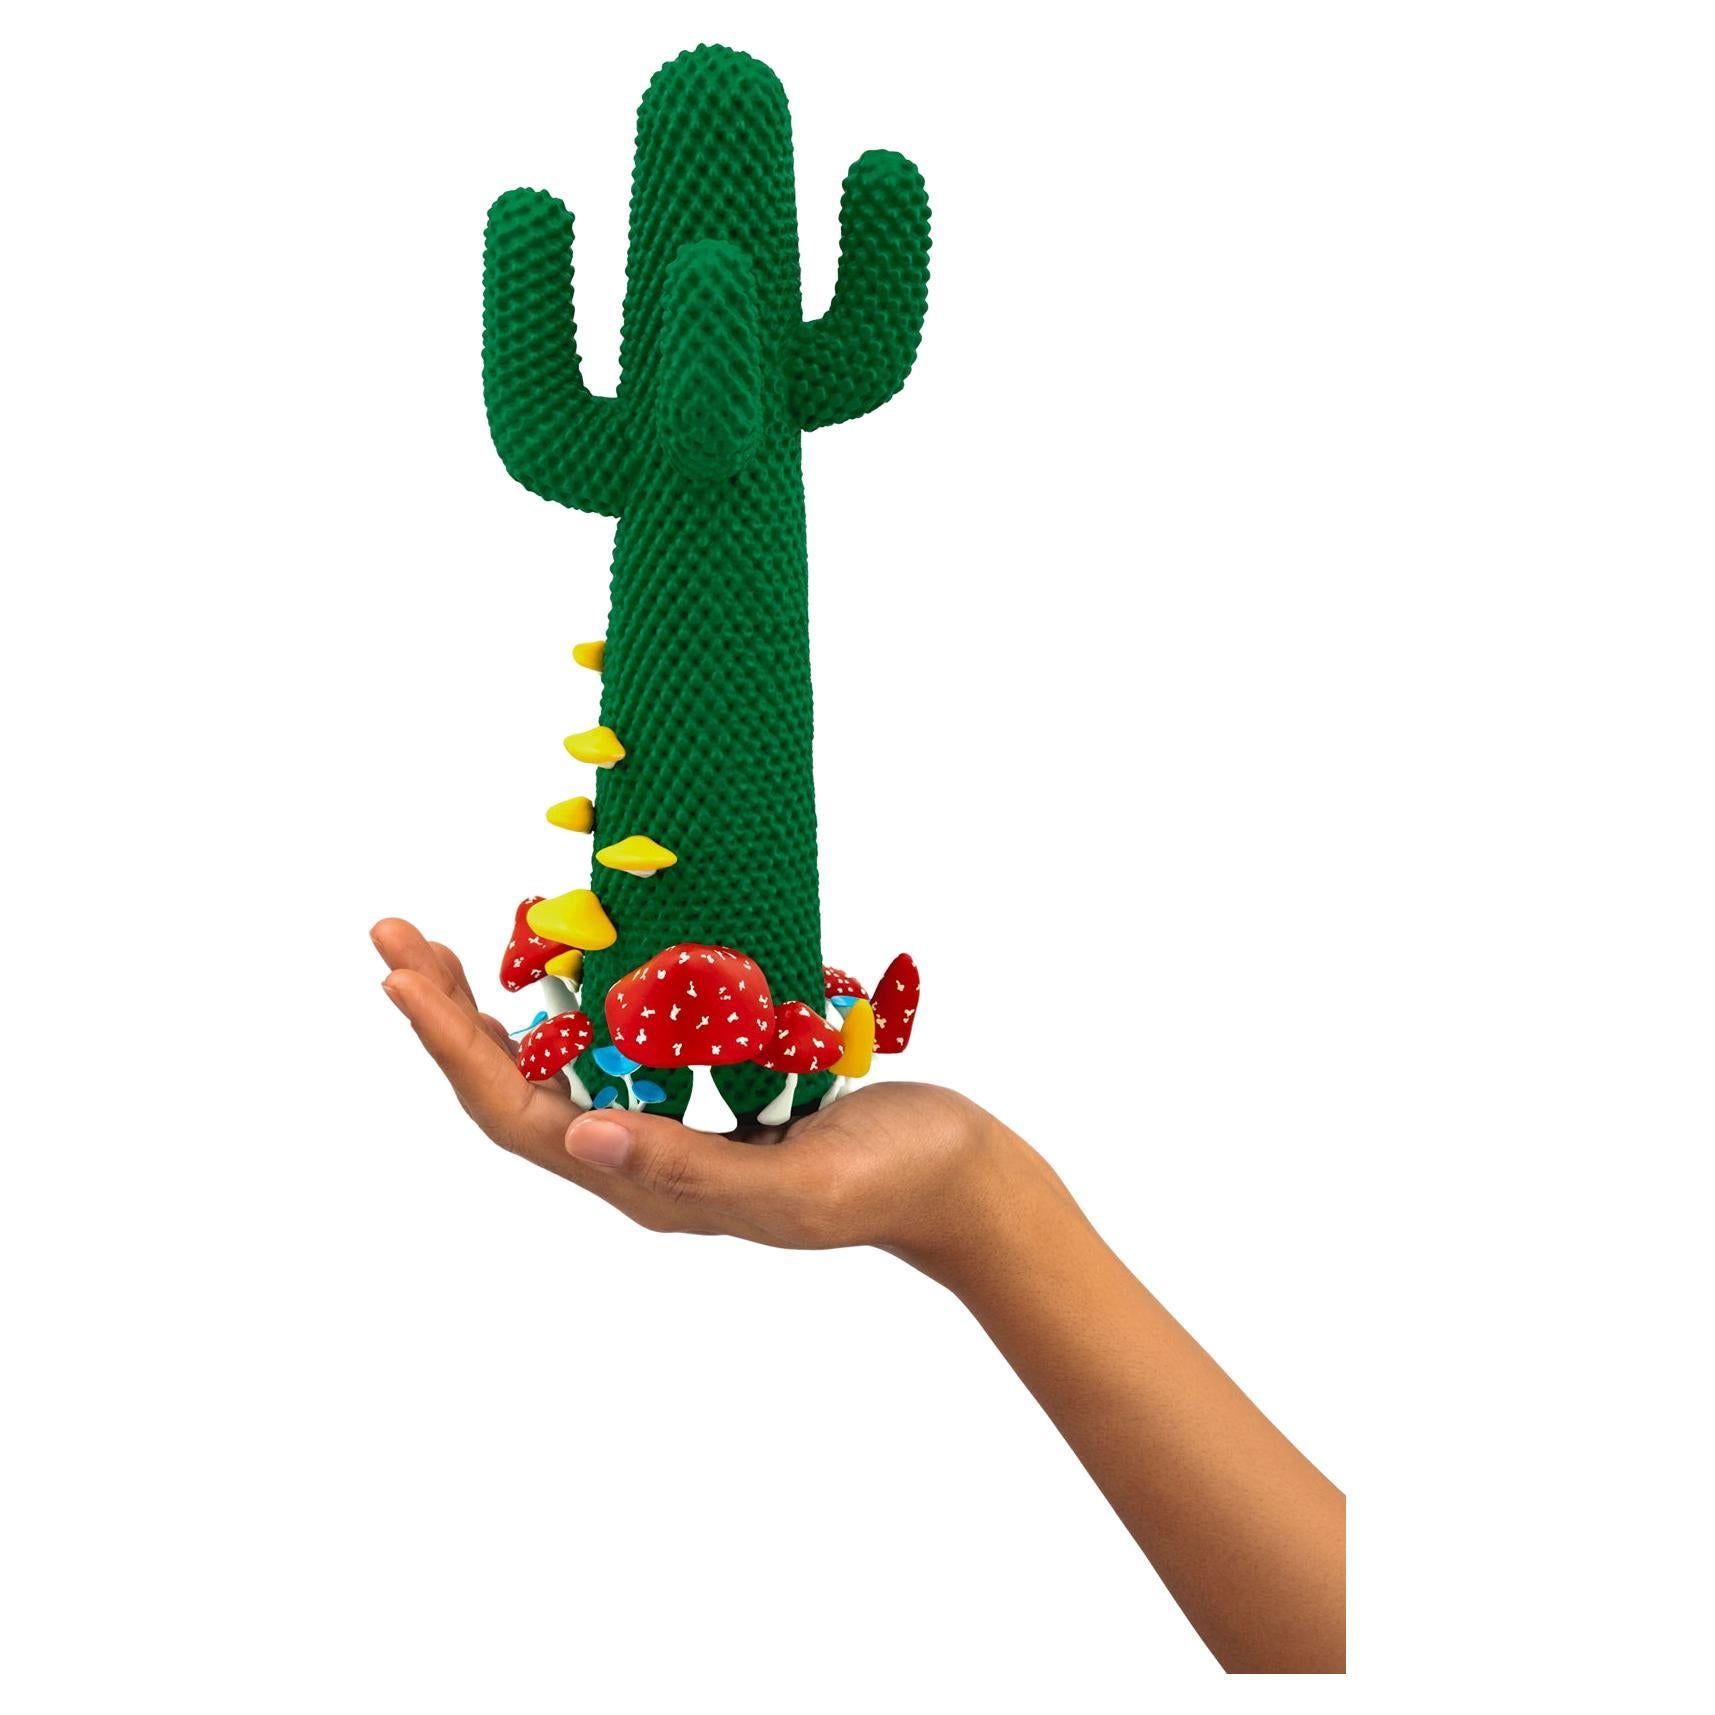 LIMITED EDITION #55/99

Gufram presents the miniaturised version of the Shroom CACTUS® created in collaboration with A$AP Rocky and the artist’s new design studio HOMMEMADE Exactly as the real-size Shroom CACTUS®, the new Guframini piece features